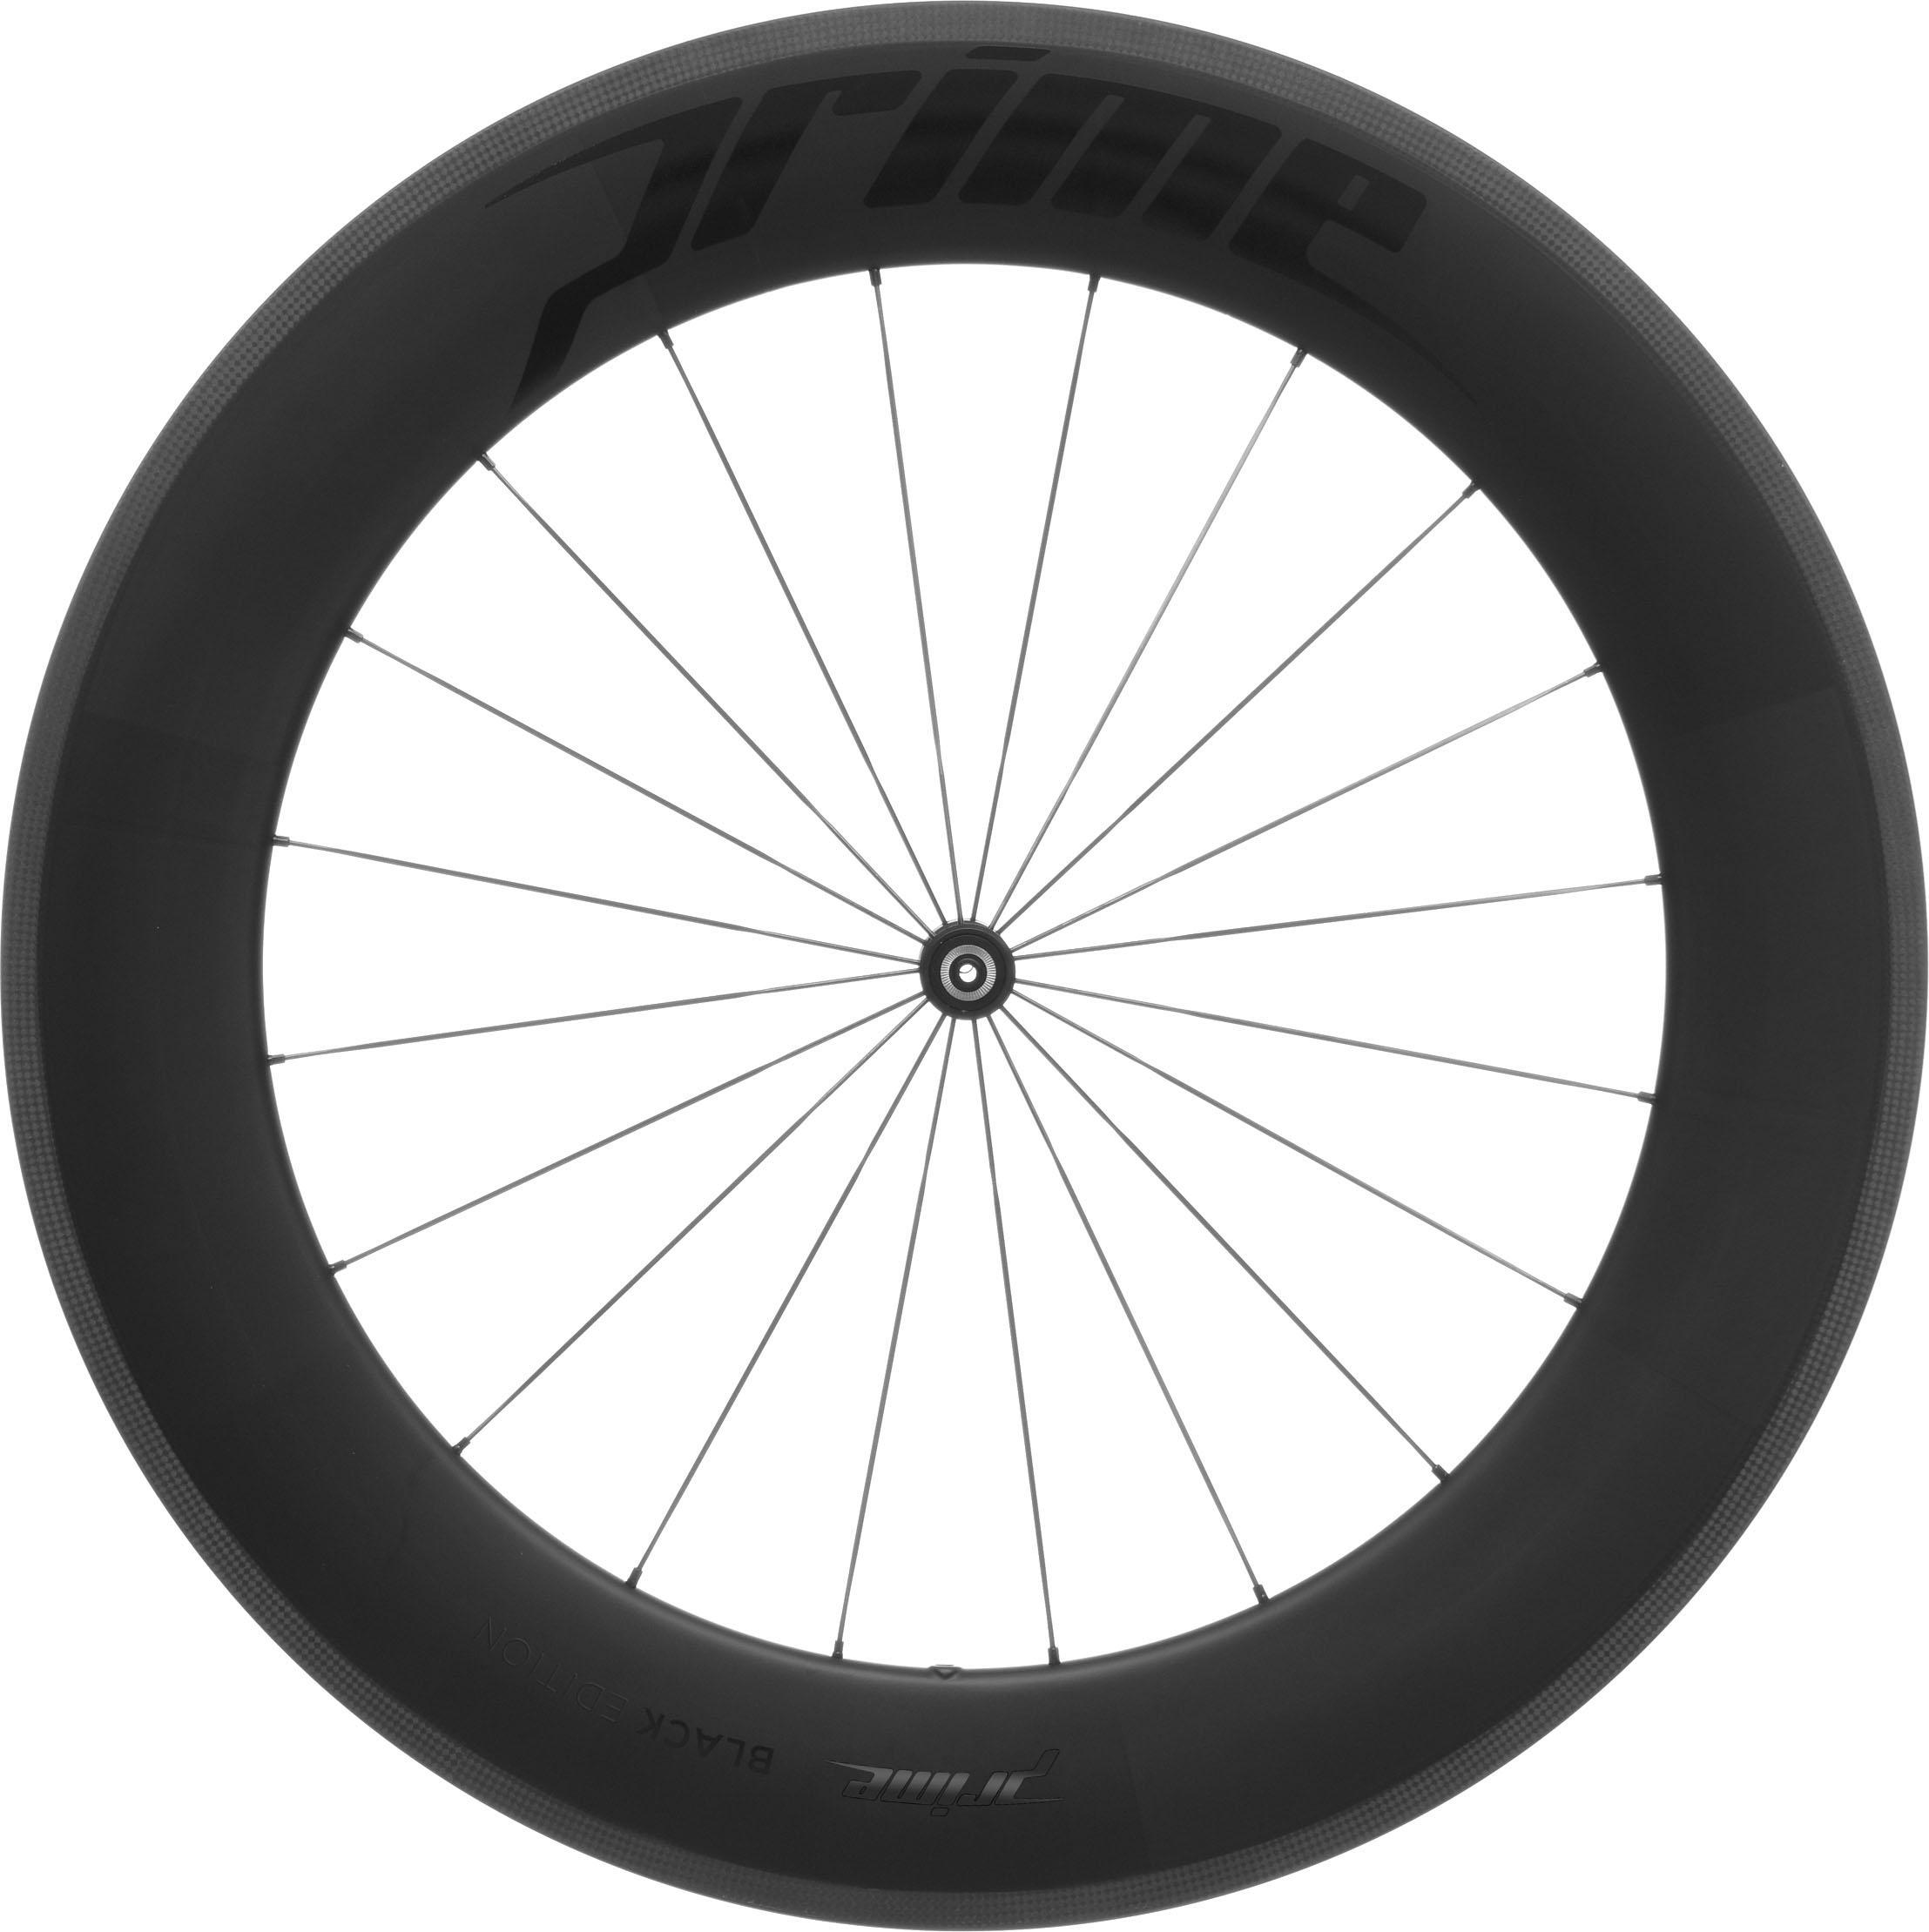 Prime BlackEdition 85 Carbon Front Road Wheel, Black - In The Know